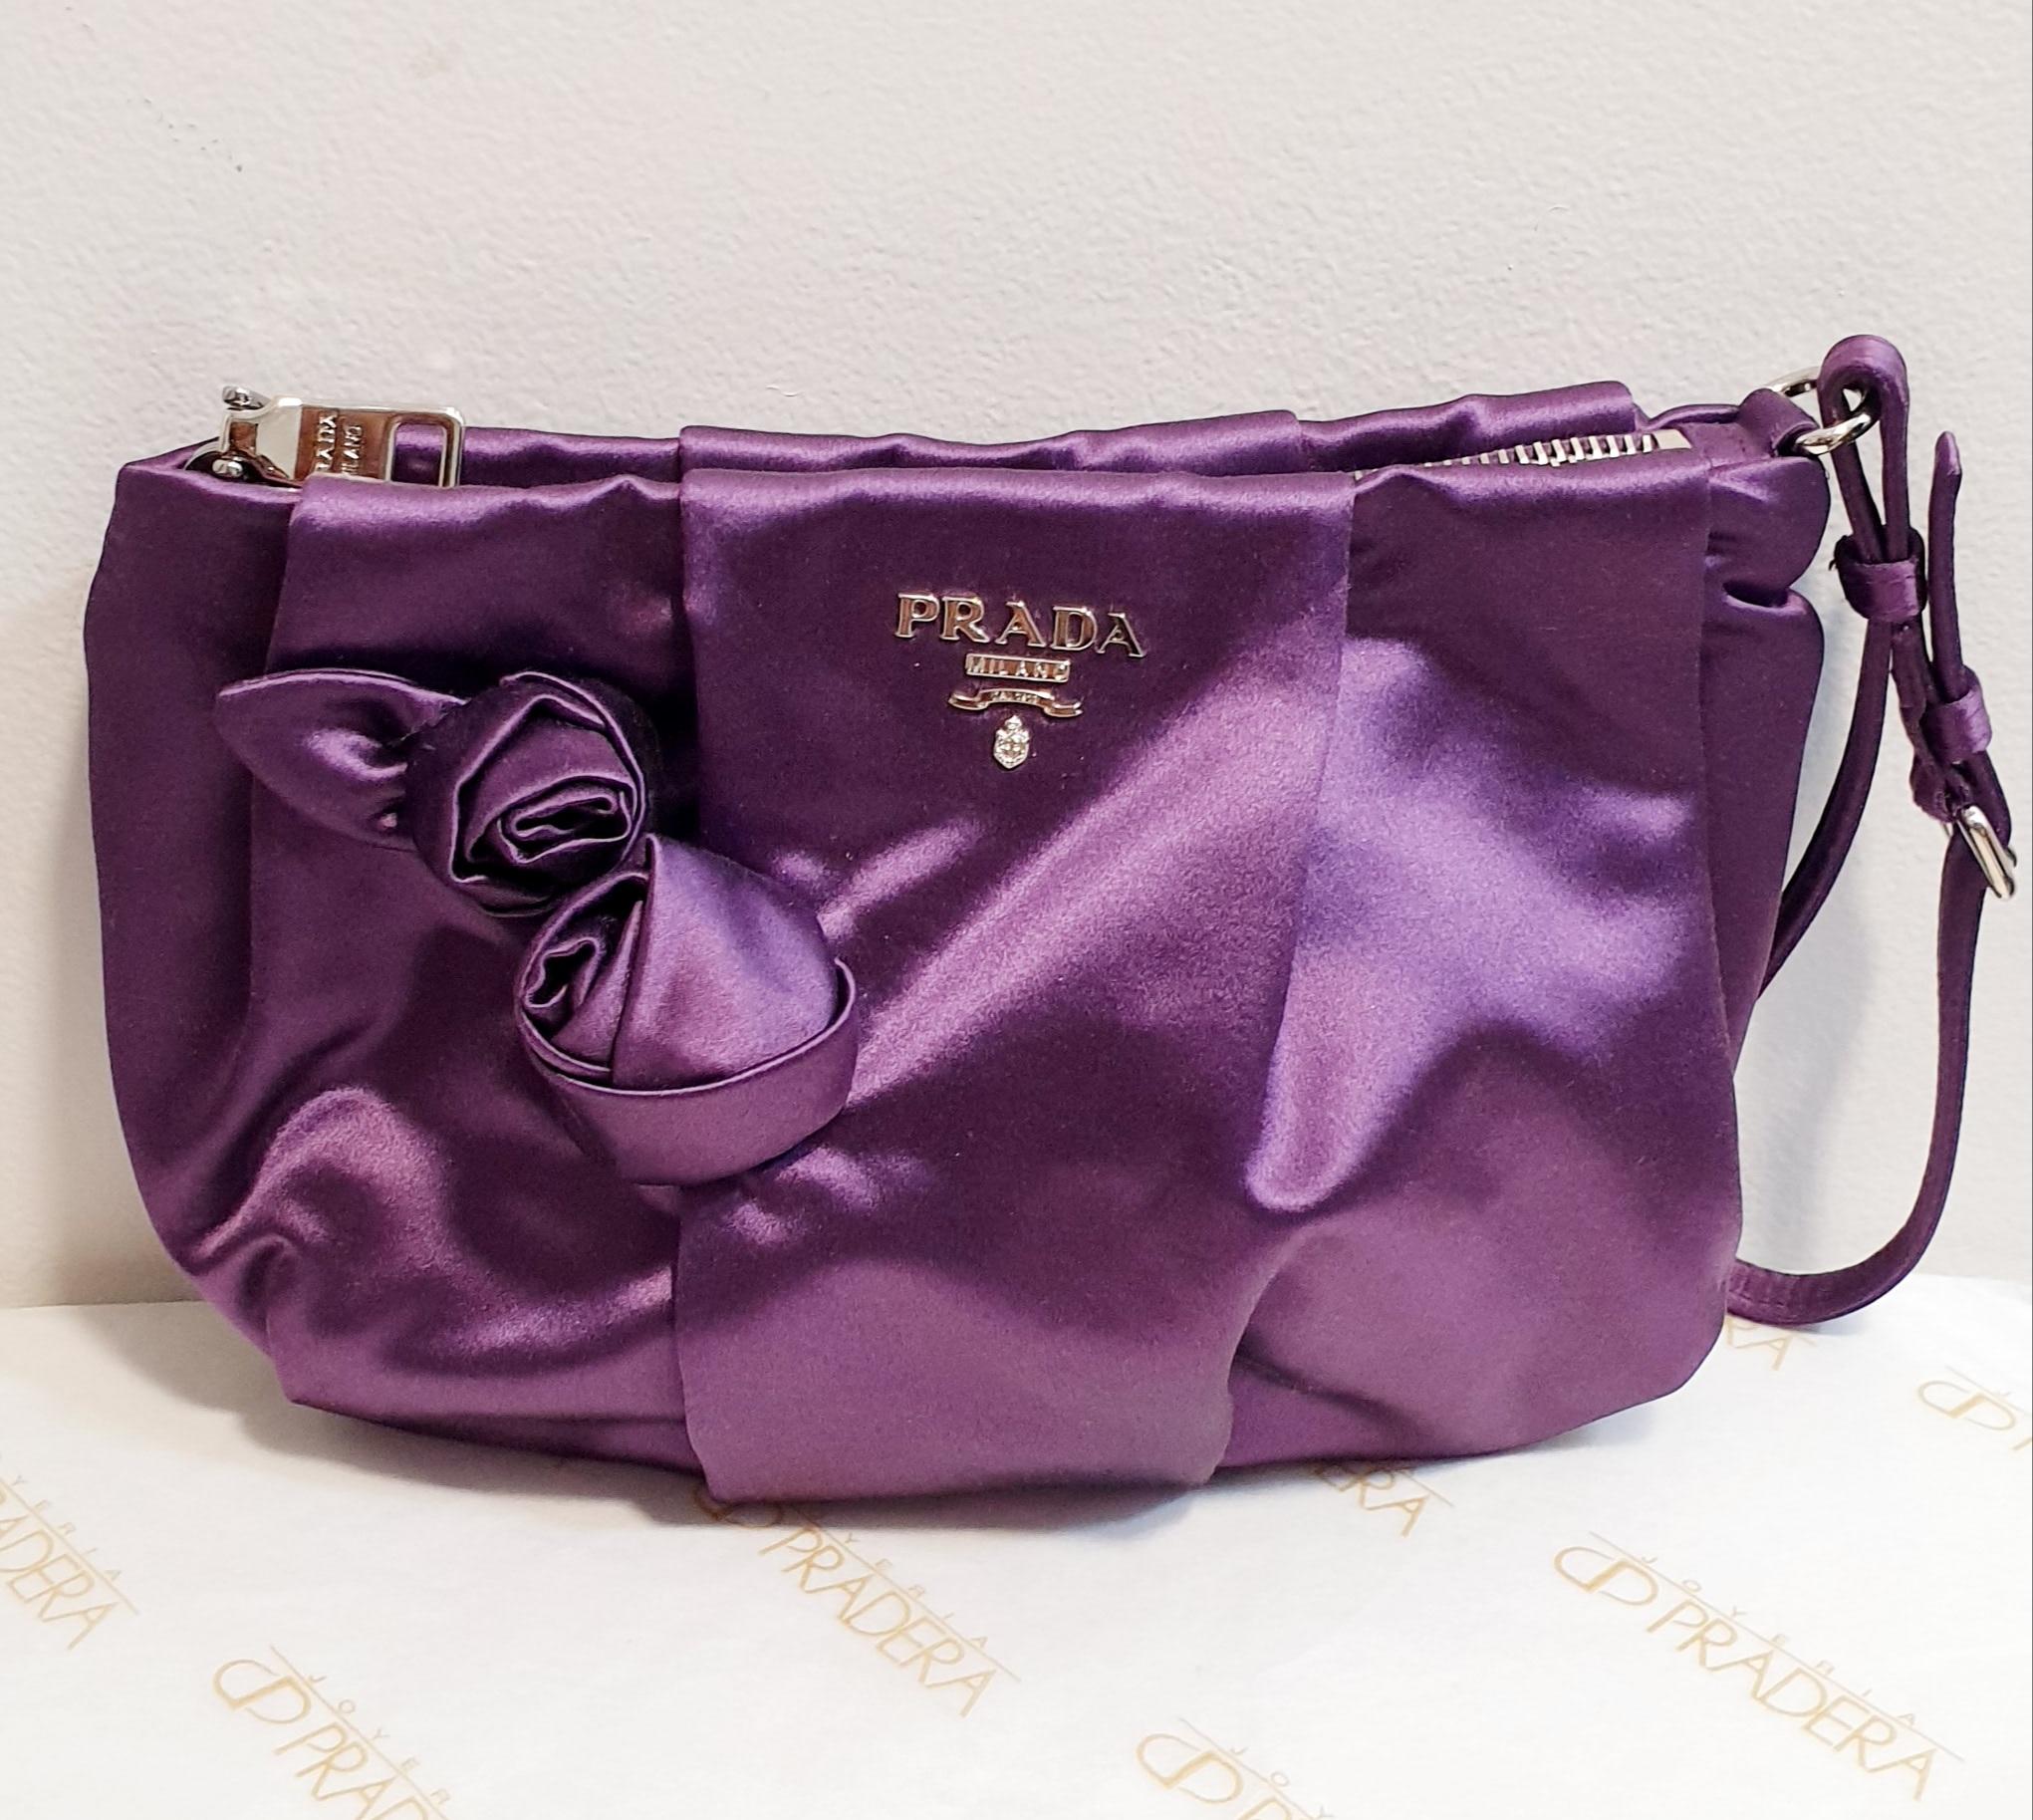 New Prada Violet flower silk  handBag with certificate
Prada silk handbag with wrist strap. Interior lined in light silk.
 With certificate and dustbag 
Silver hardware. 
Rest of boutique stock
Never used
Original bag and papers
Dimensions:
Length: